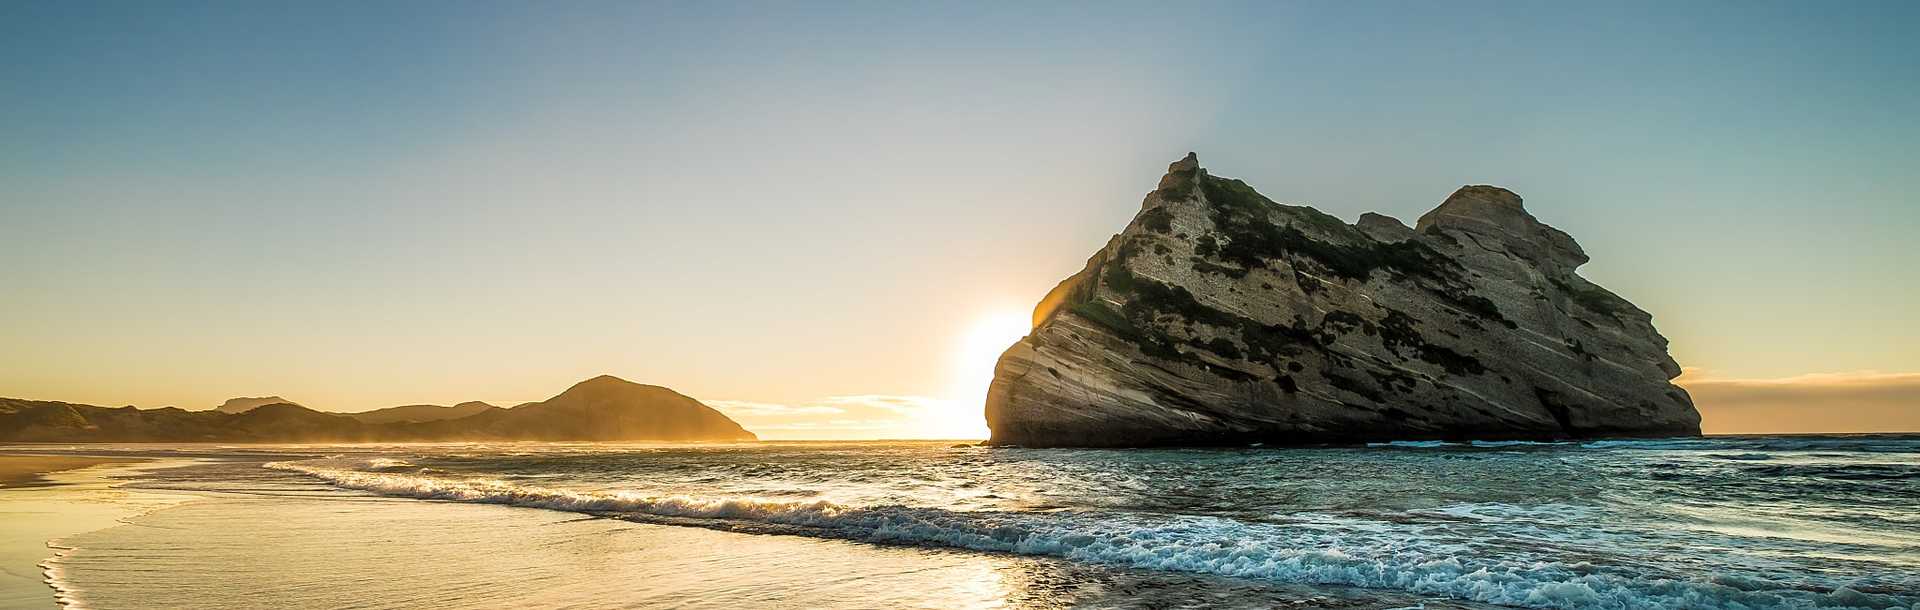 Sun rising behind the rock formation at Wharariki Beach on the South Island of New Zealand.